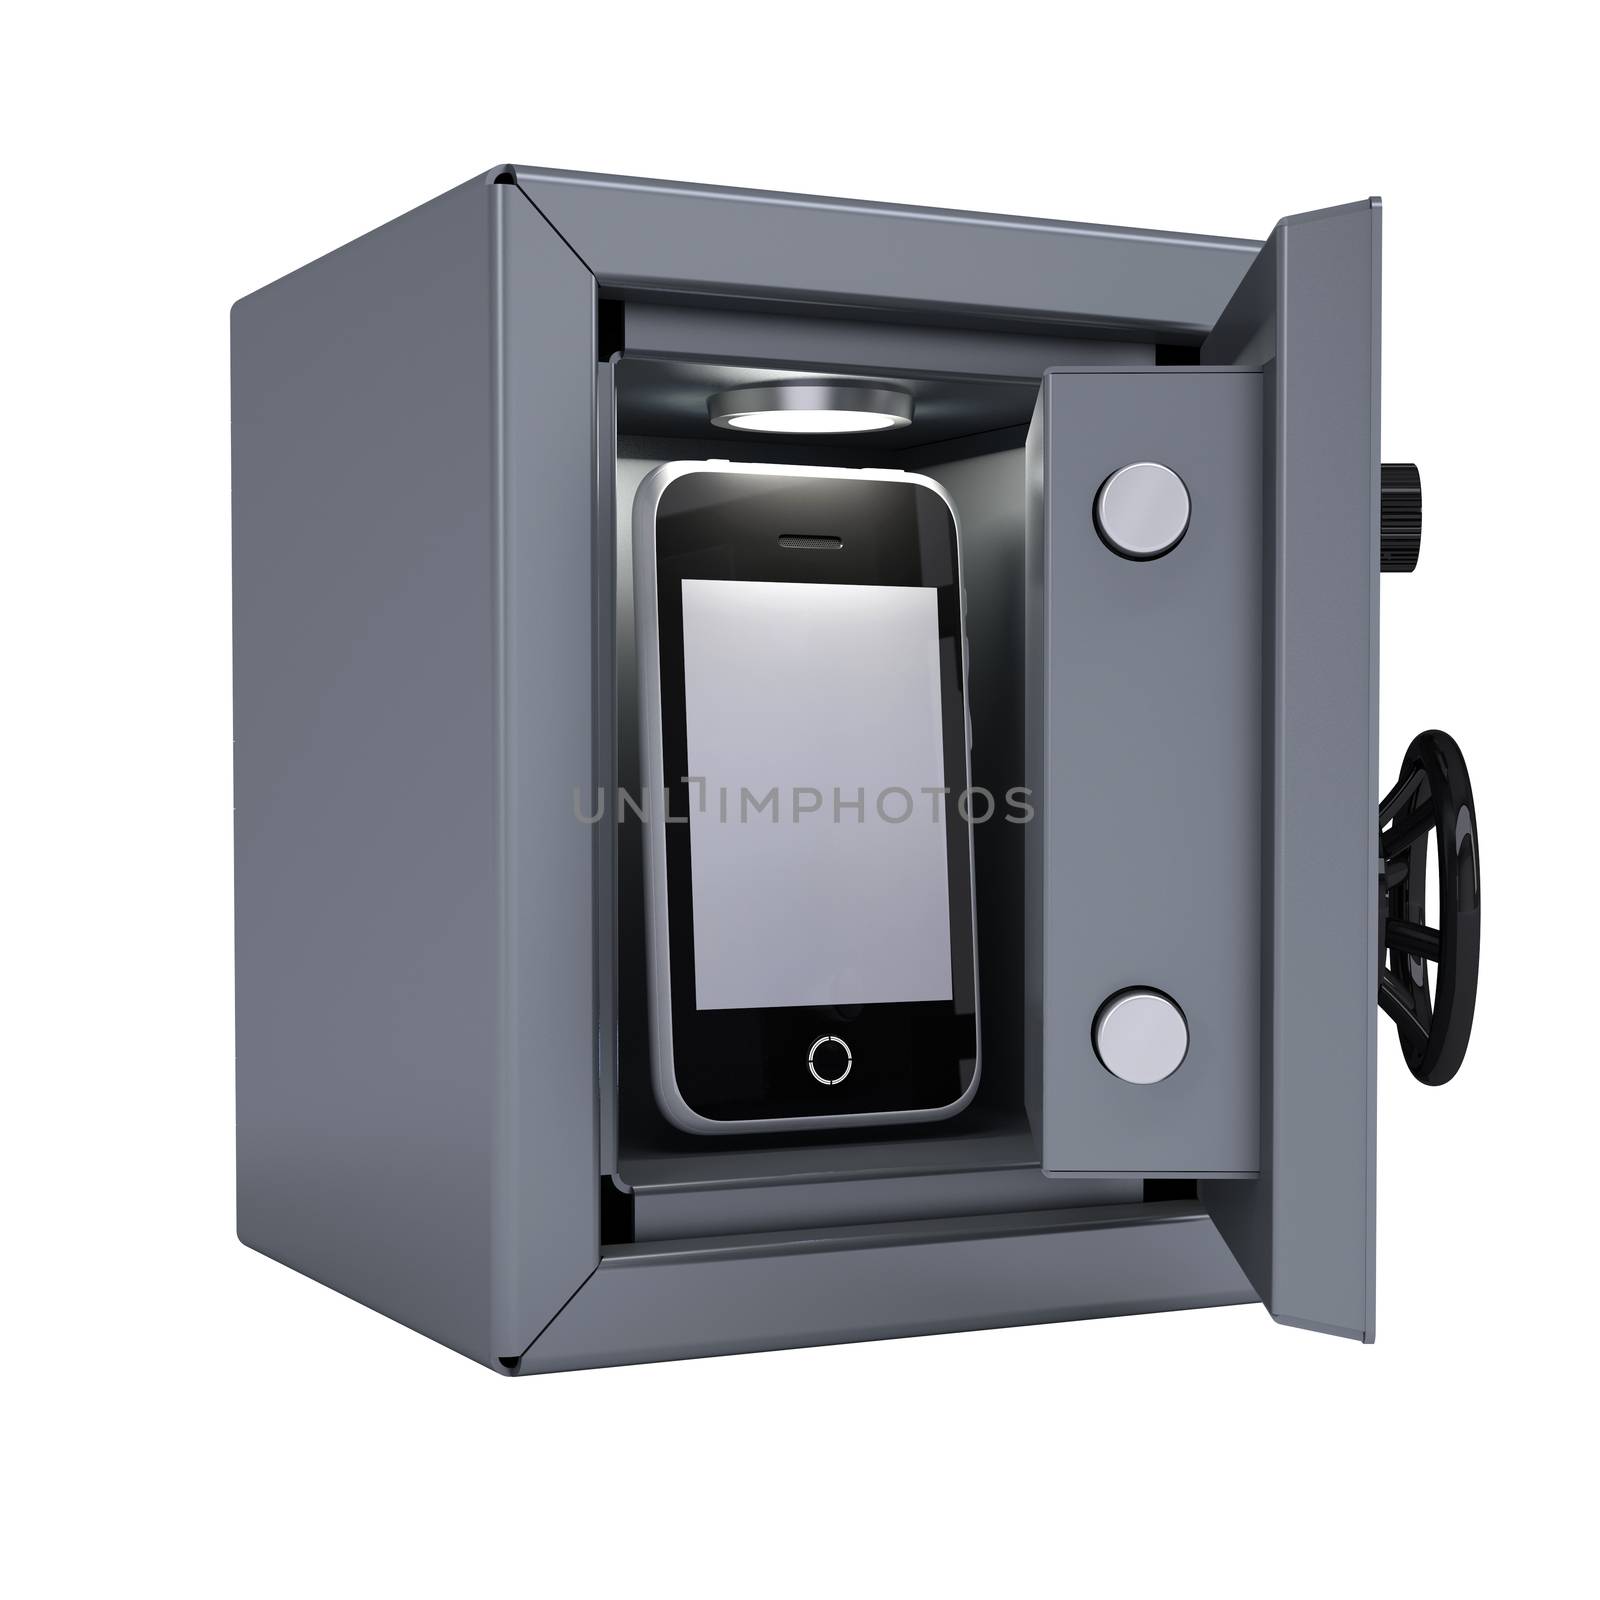 Smartphone in an open metal safe by cherezoff